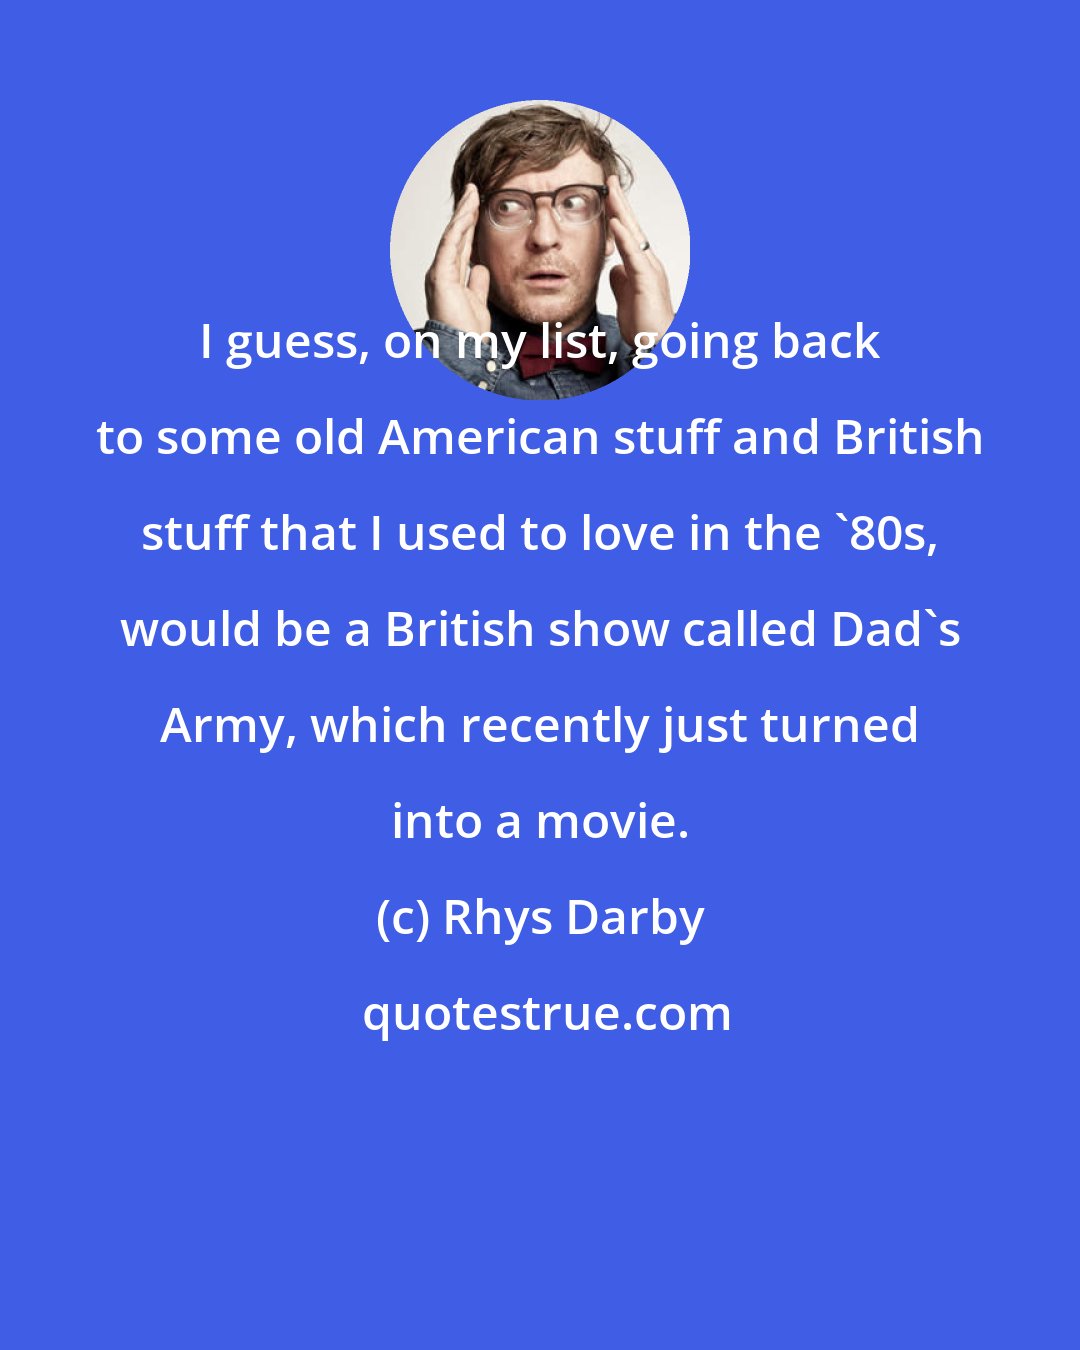 Rhys Darby: I guess, on my list, going back to some old American stuff and British stuff that I used to love in the '80s, would be a British show called Dad's Army, which recently just turned into a movie.